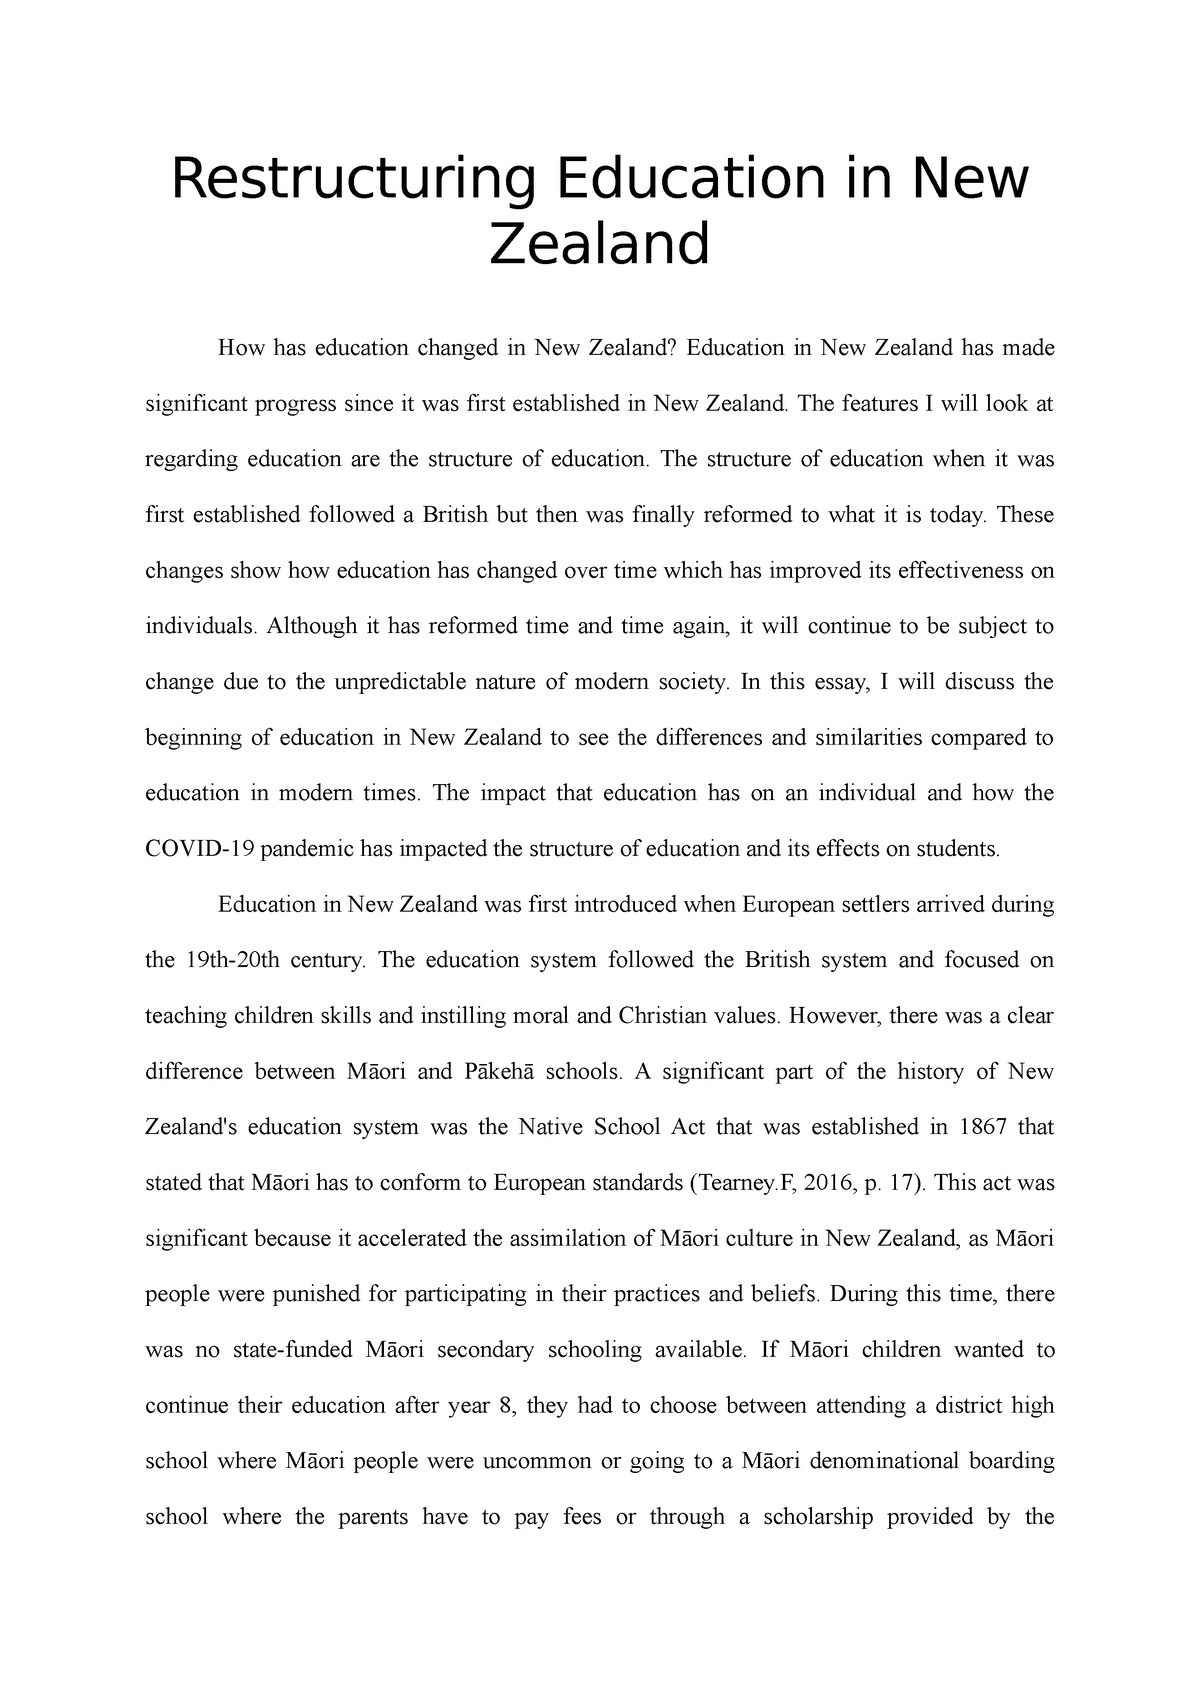 new zealand essay conclusion